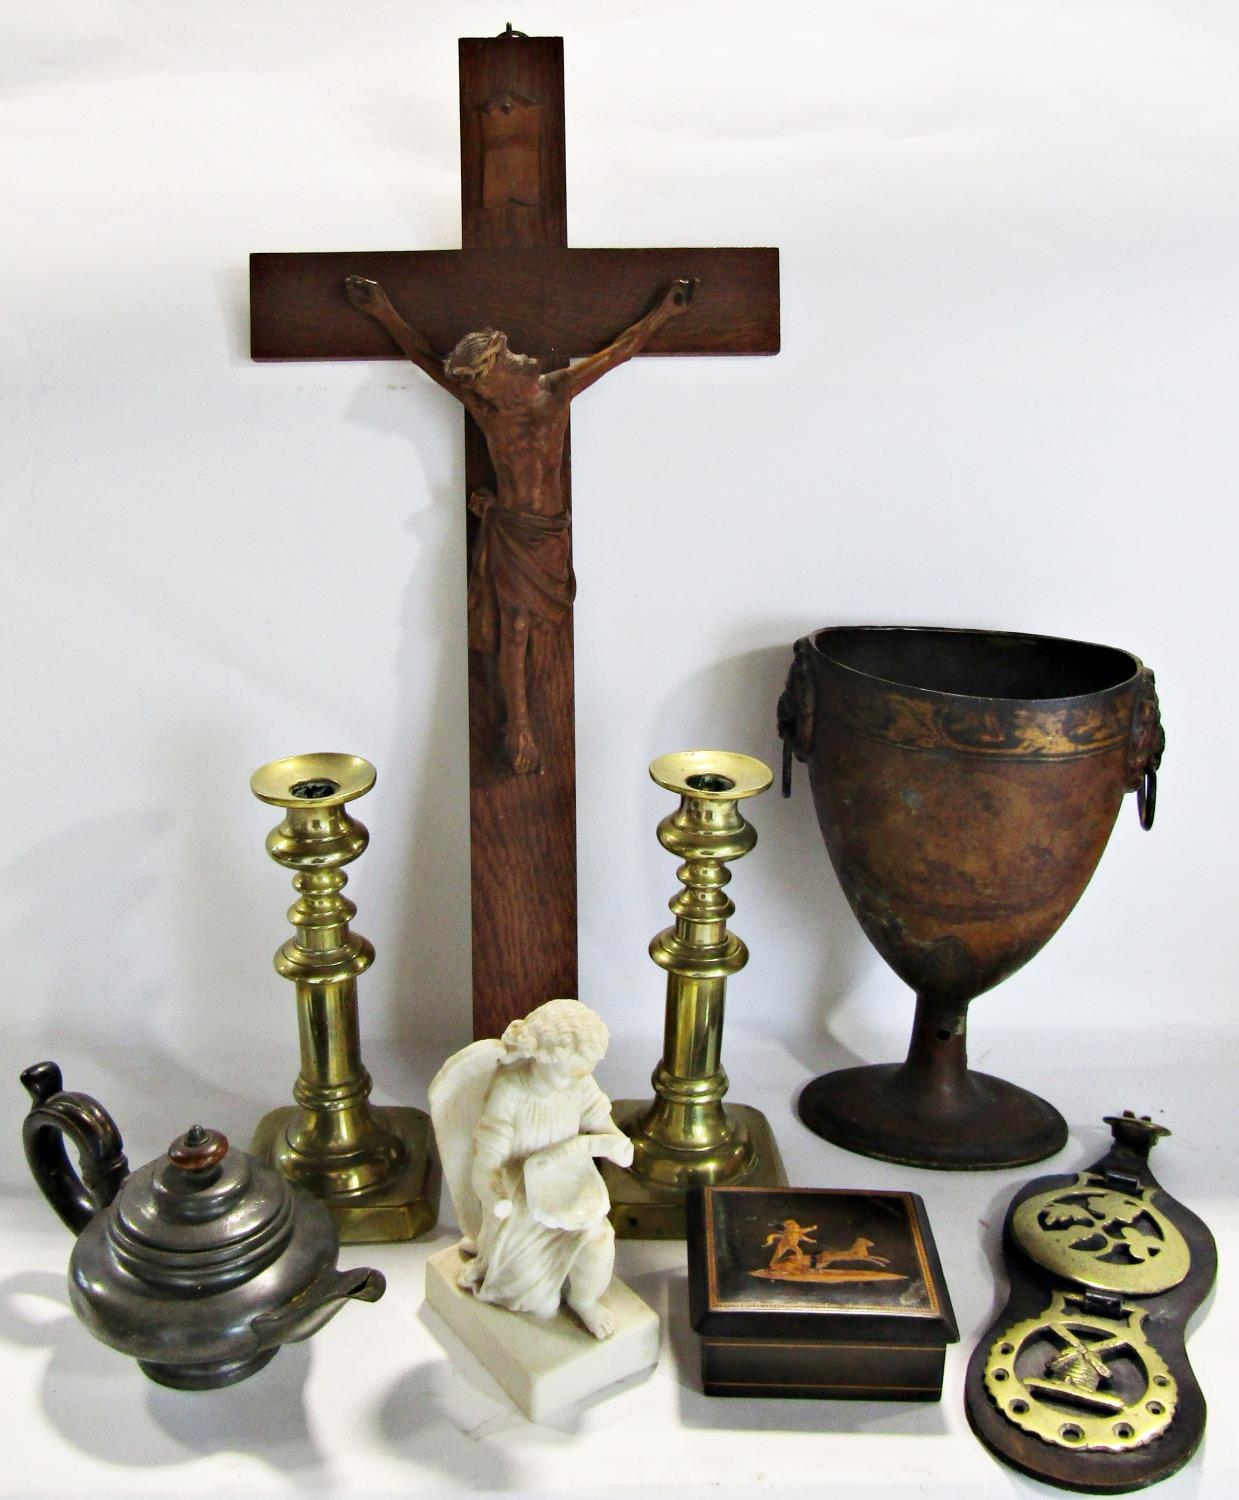 A miscellaneous collection of items including a pair of brass candlesticks, a Tole ware urn with